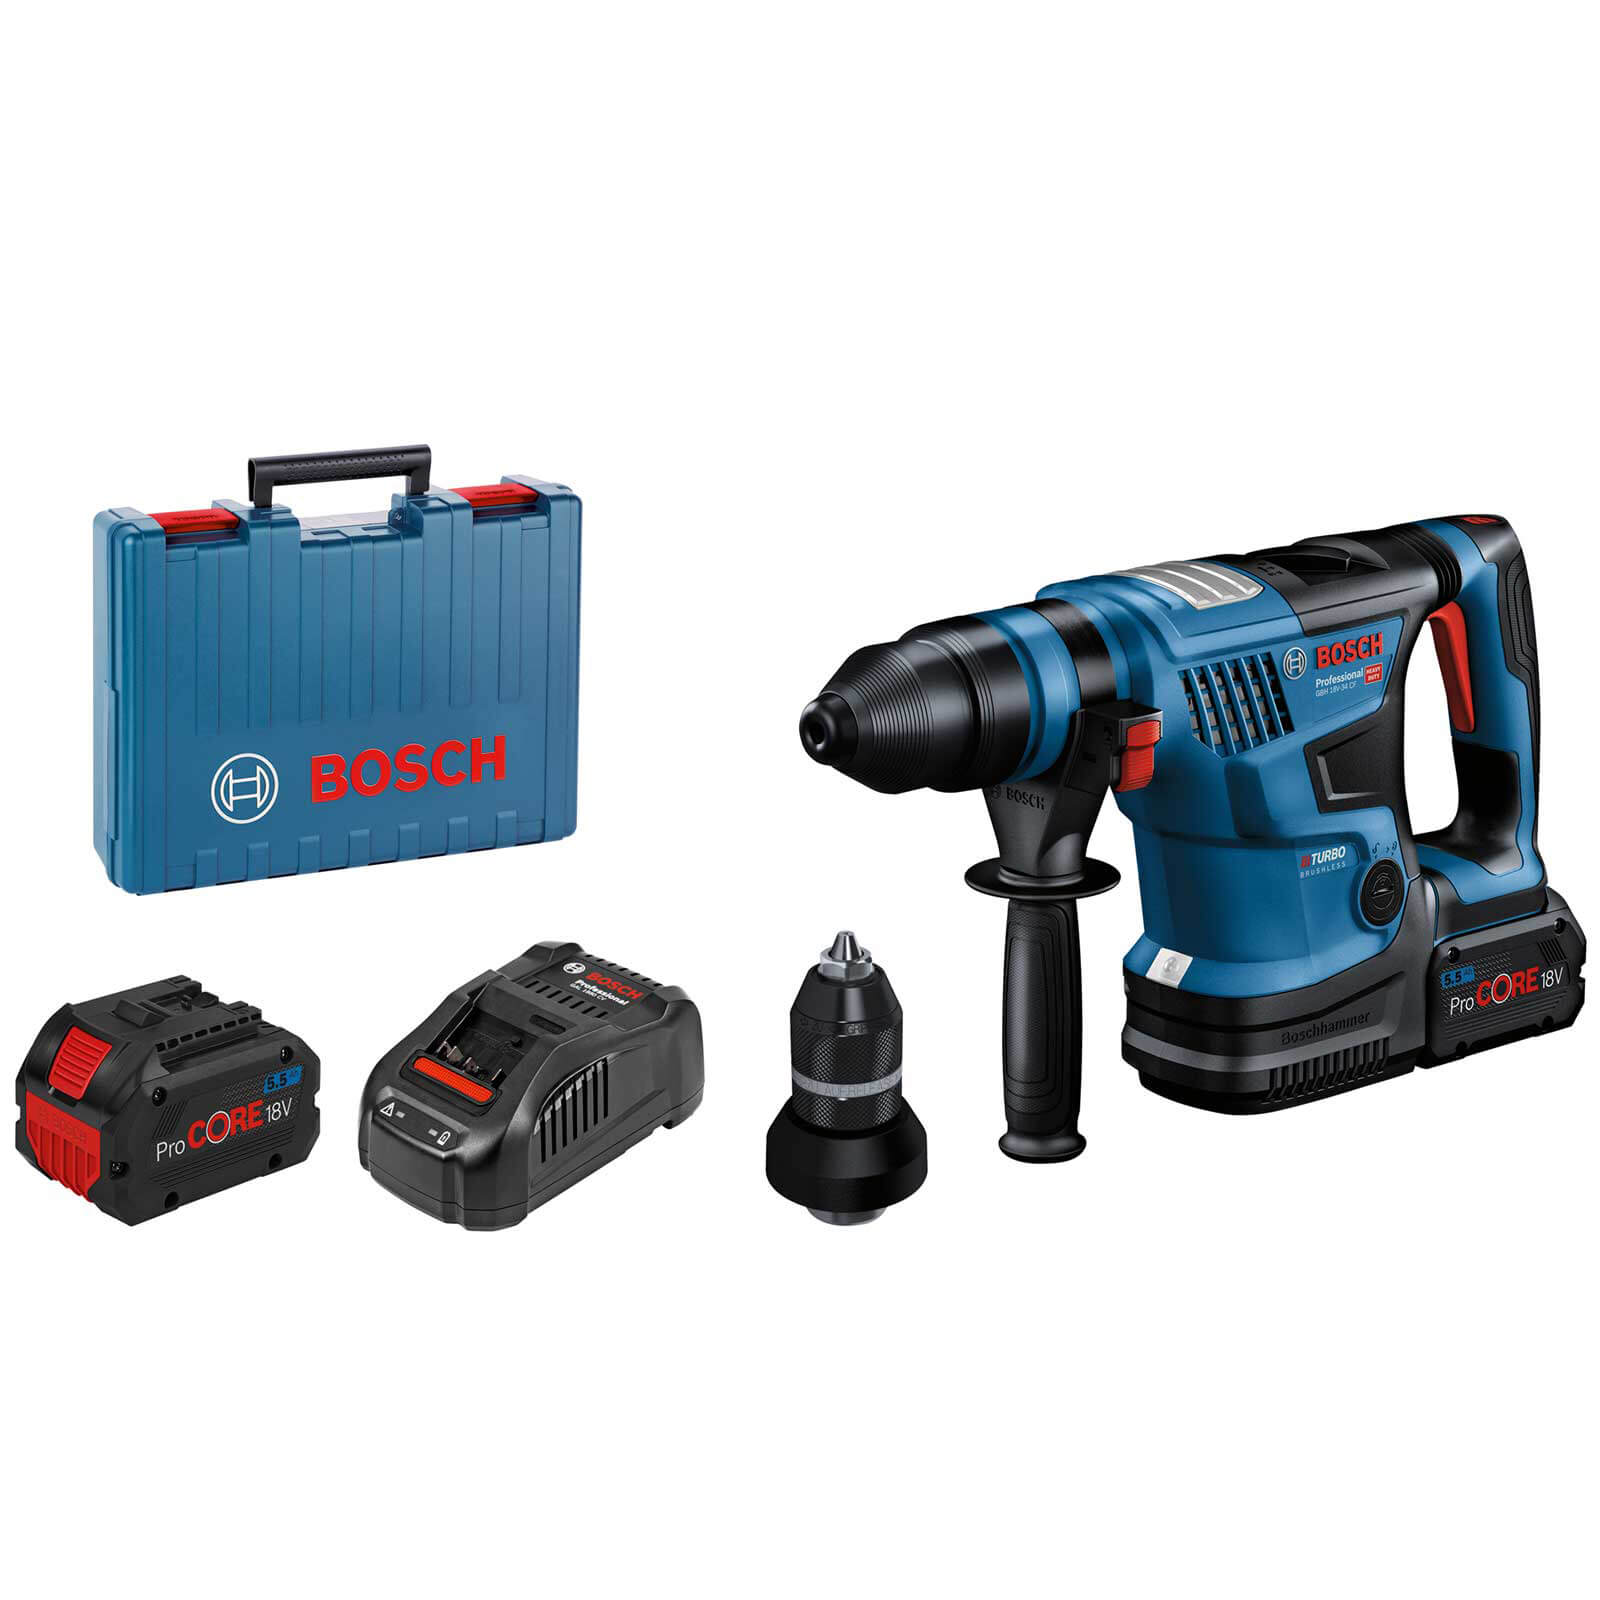 Image of Bosch GBH 18V-34 CF BITURBO 18v Brushless SDS Plus Rotary Hammer Drill 2 x 5.5ah Li-ion Charger Case